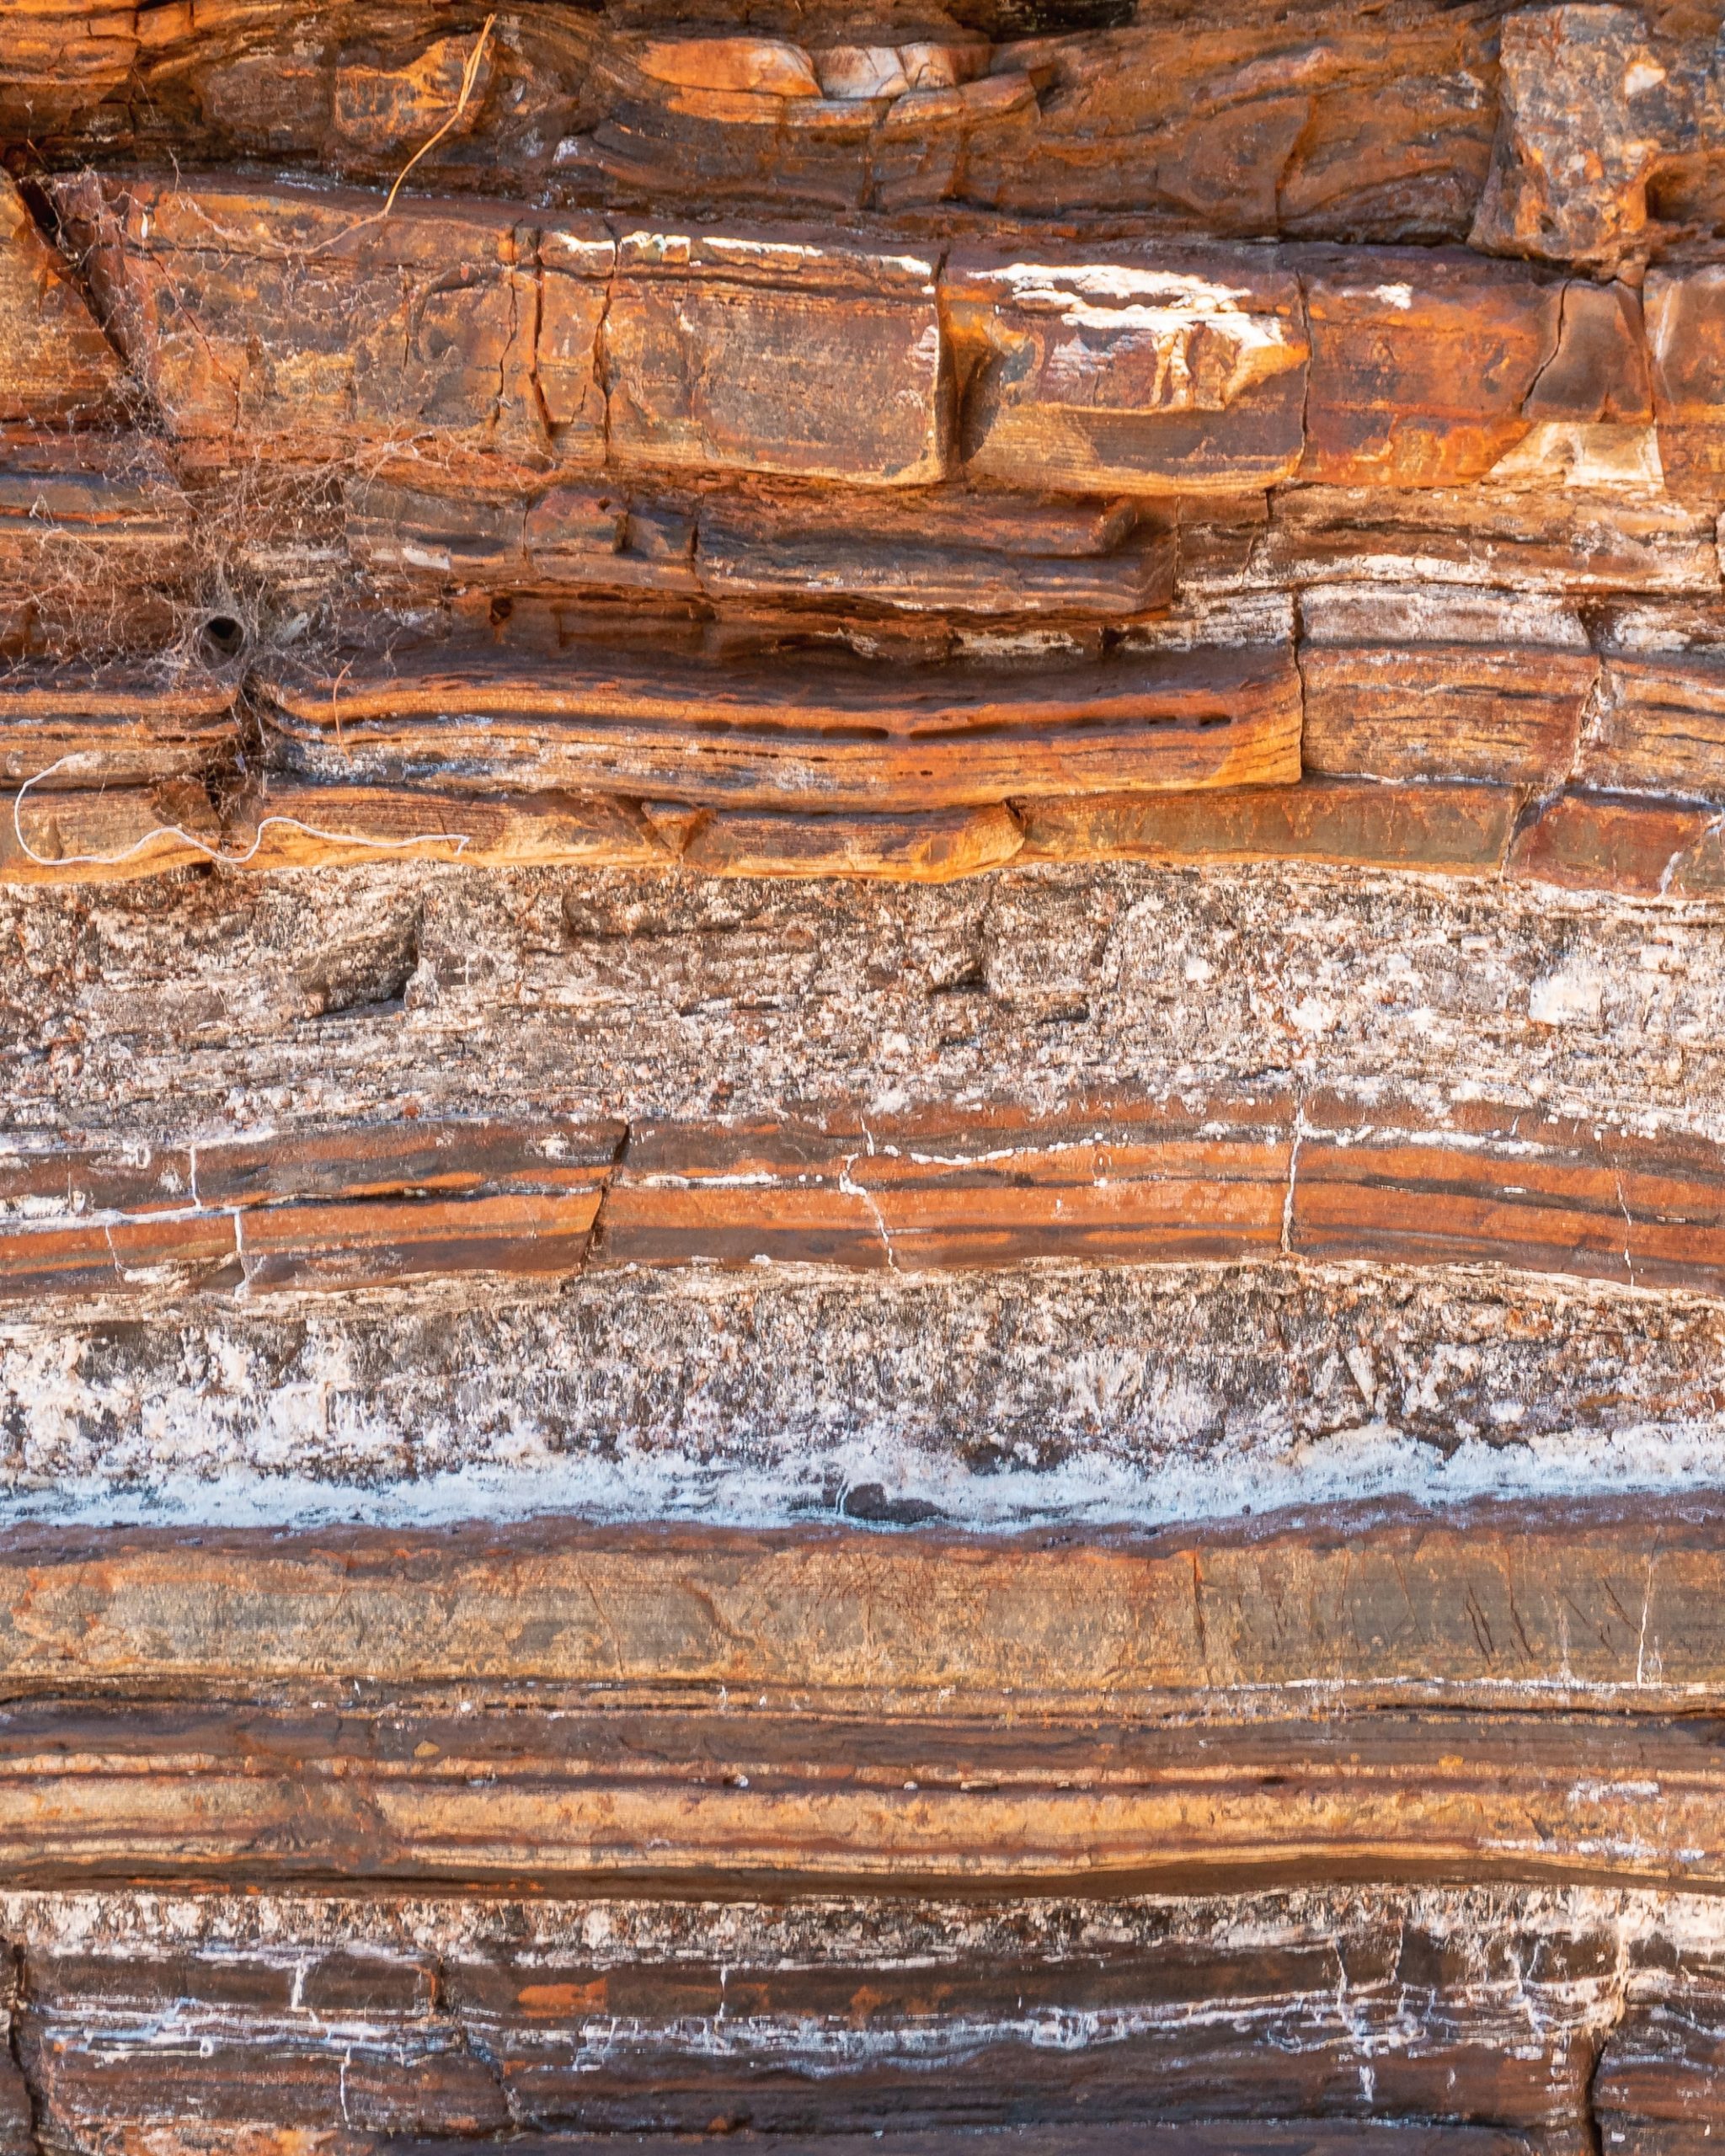 Rock layers show historical climate change